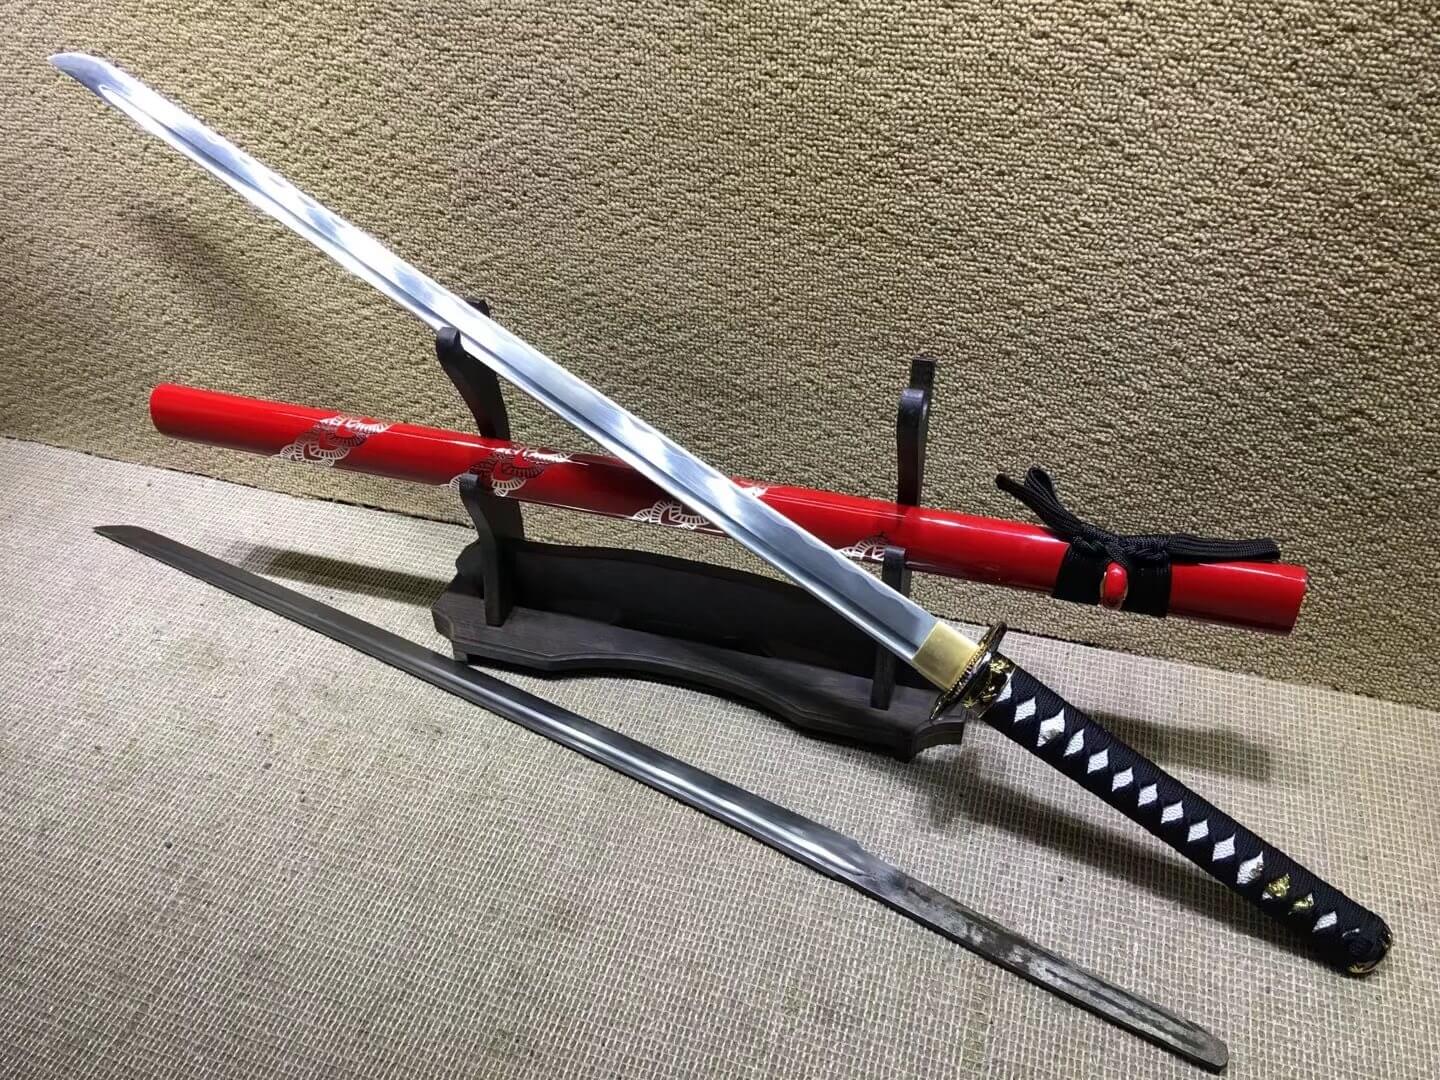 Ninja Sword(Medium carbon steel bade,Red scabbard,Alloy fitteds)Length 40" - Chinese sword shop